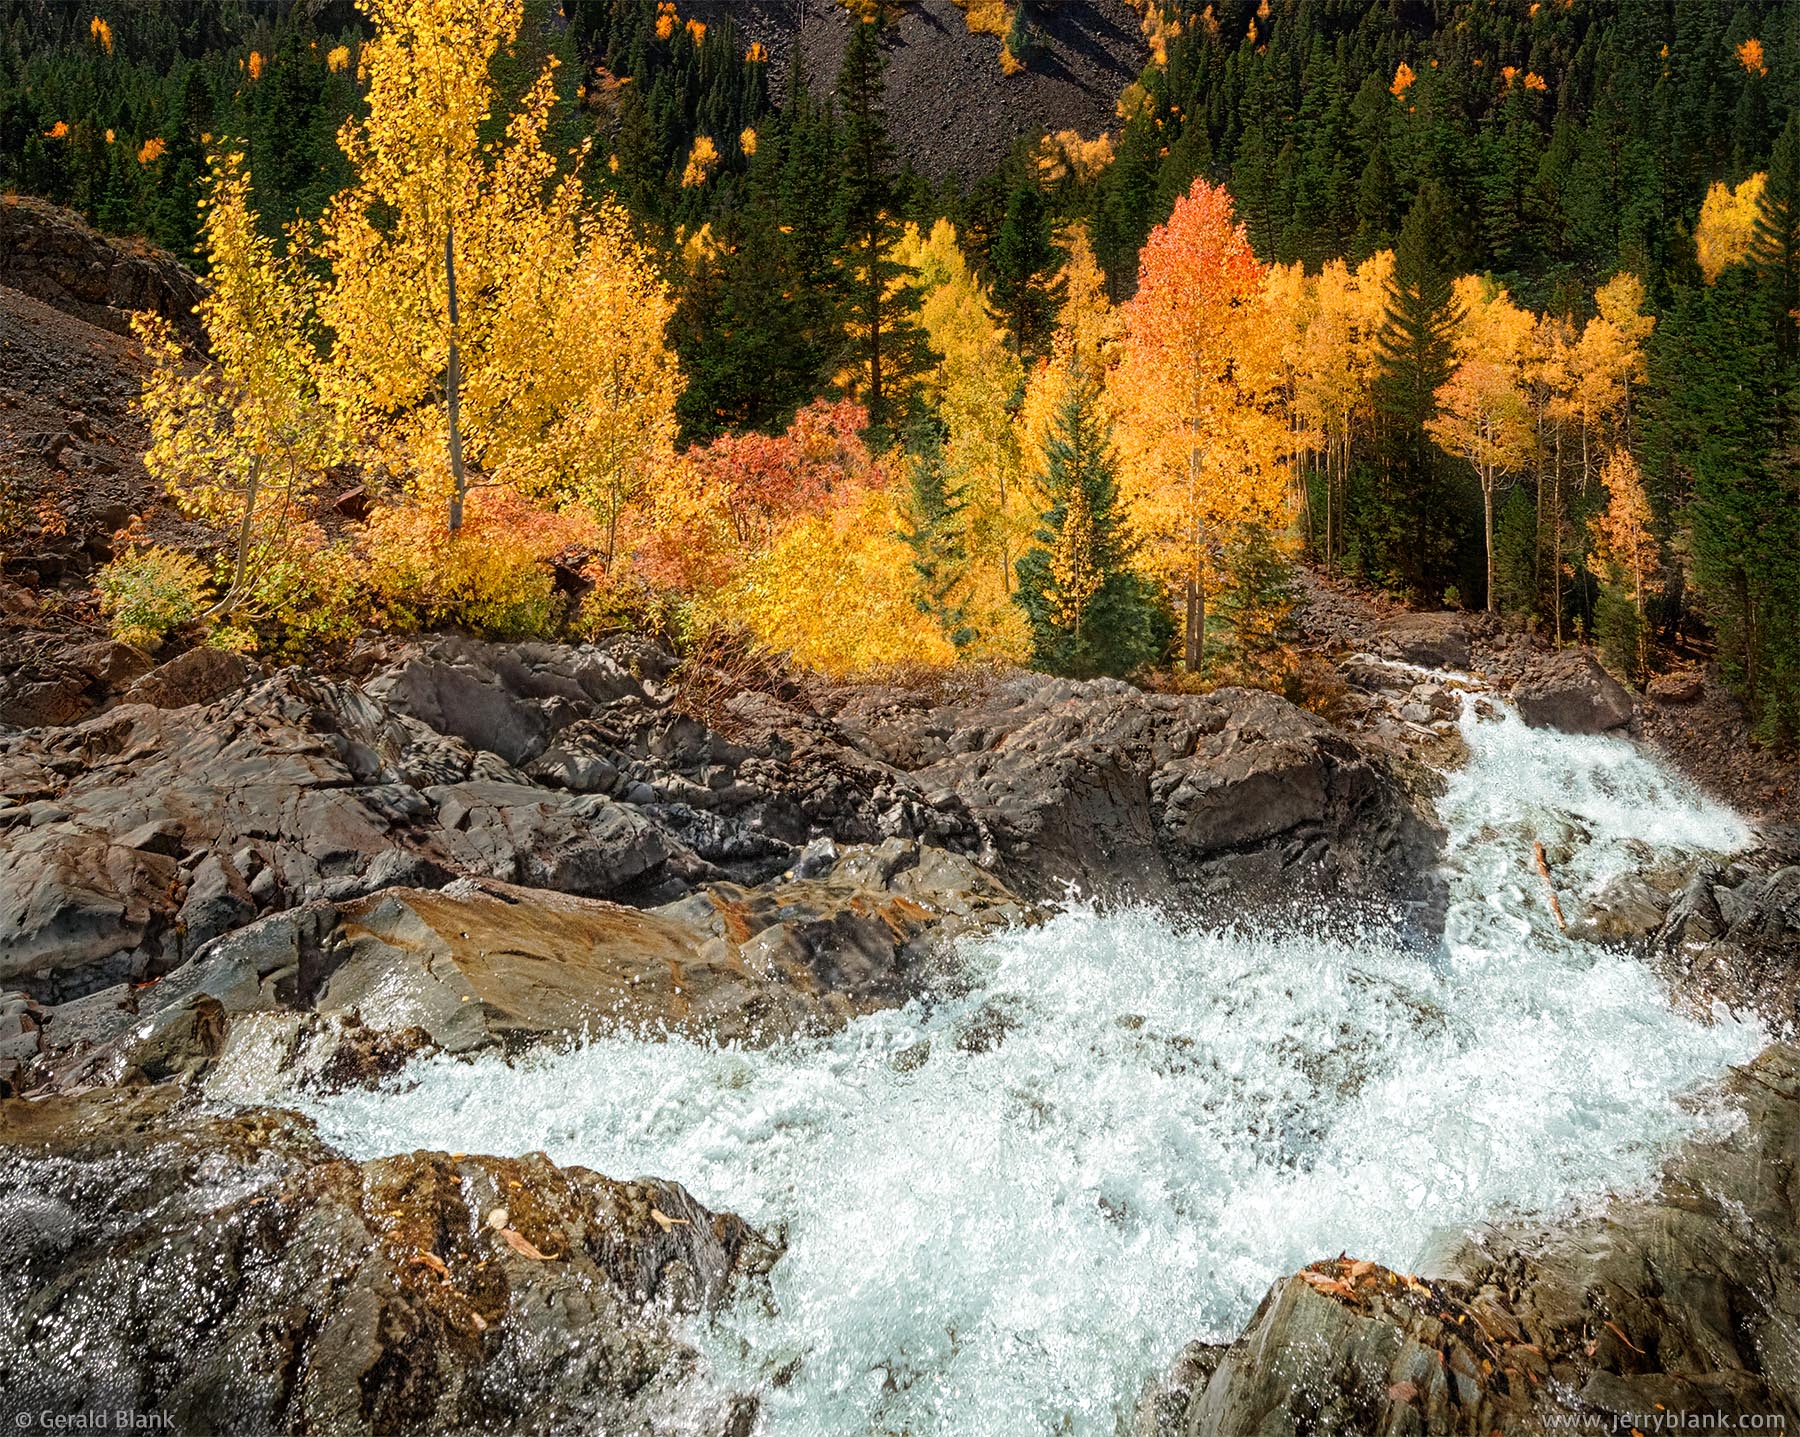 #07133 - The Uncompahgre River splashes down a colorful canyon as it flows toward Ouray, Colorado - photo by Jerry Blank